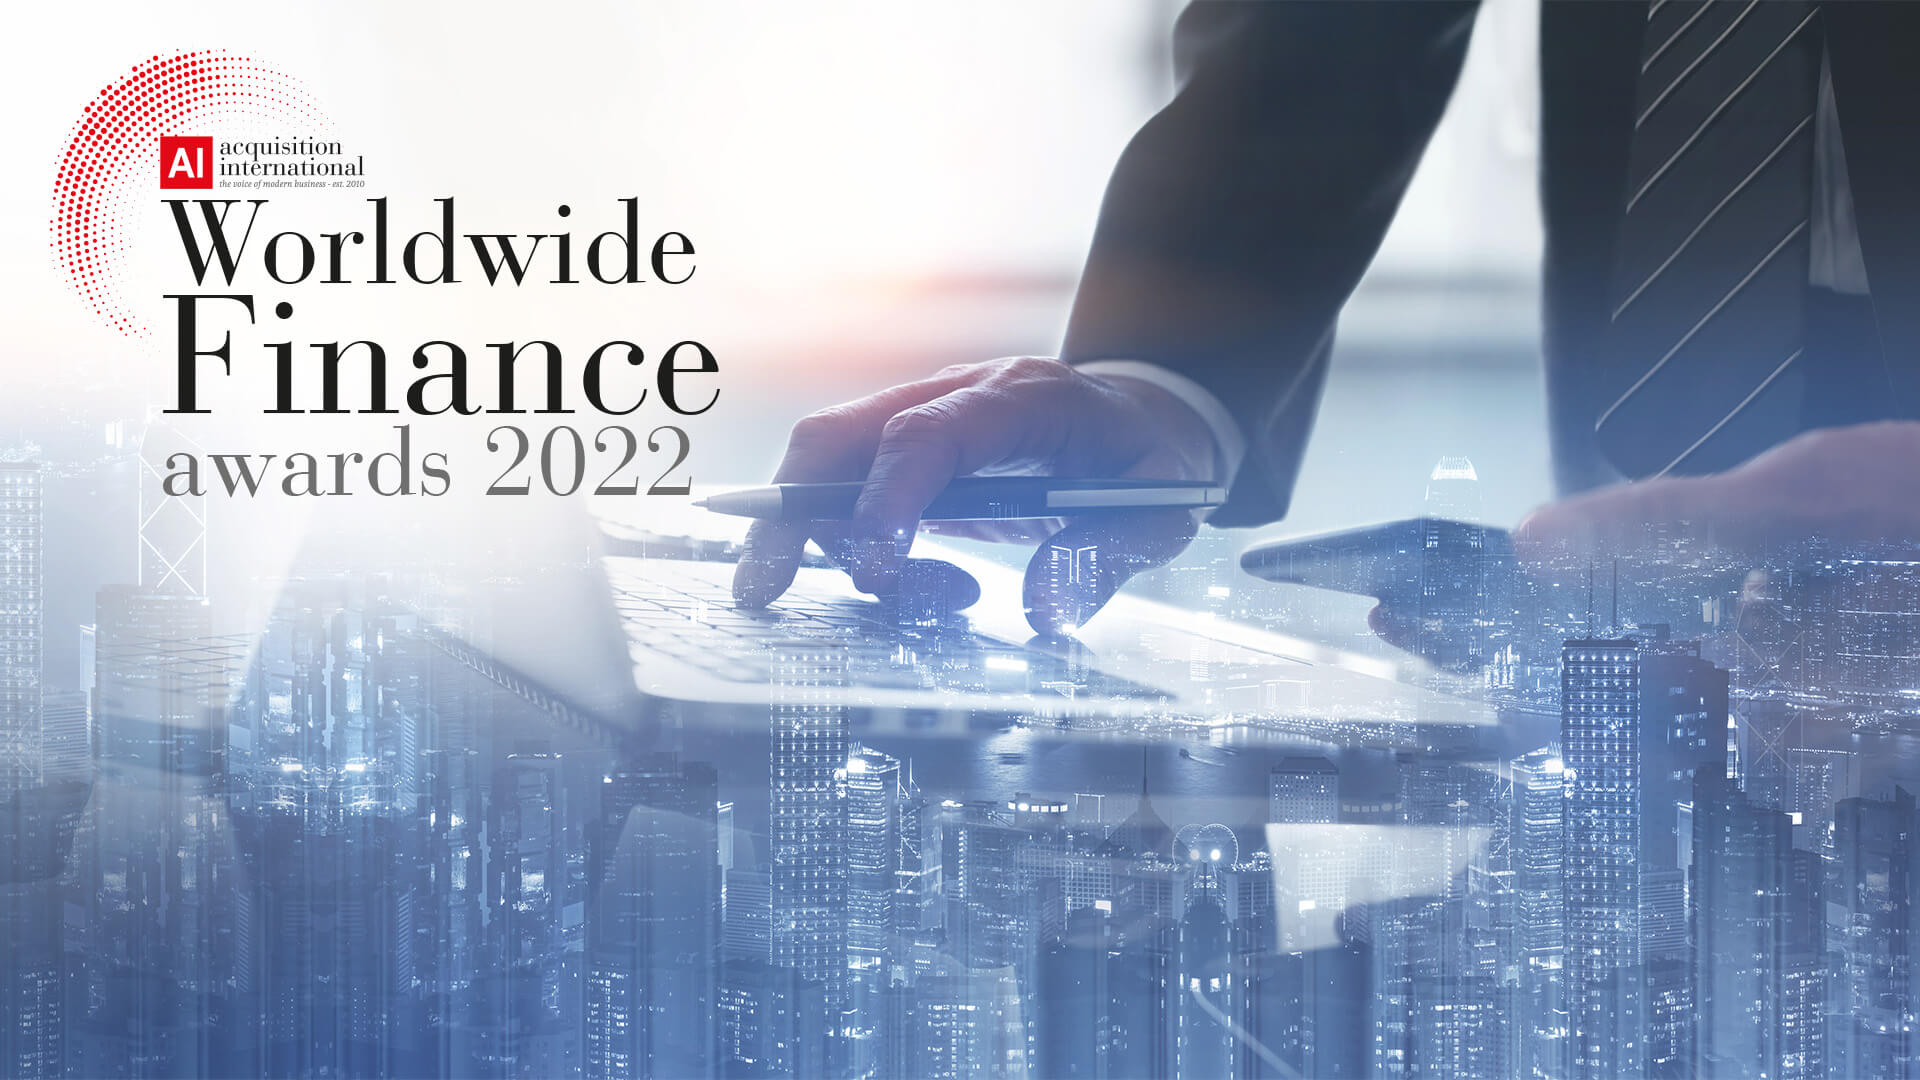 Double exposure image of a business man writing on a finance report, with a cityscape blended in. The 2022 Worldwide Finance Awards logo is in the top left corner